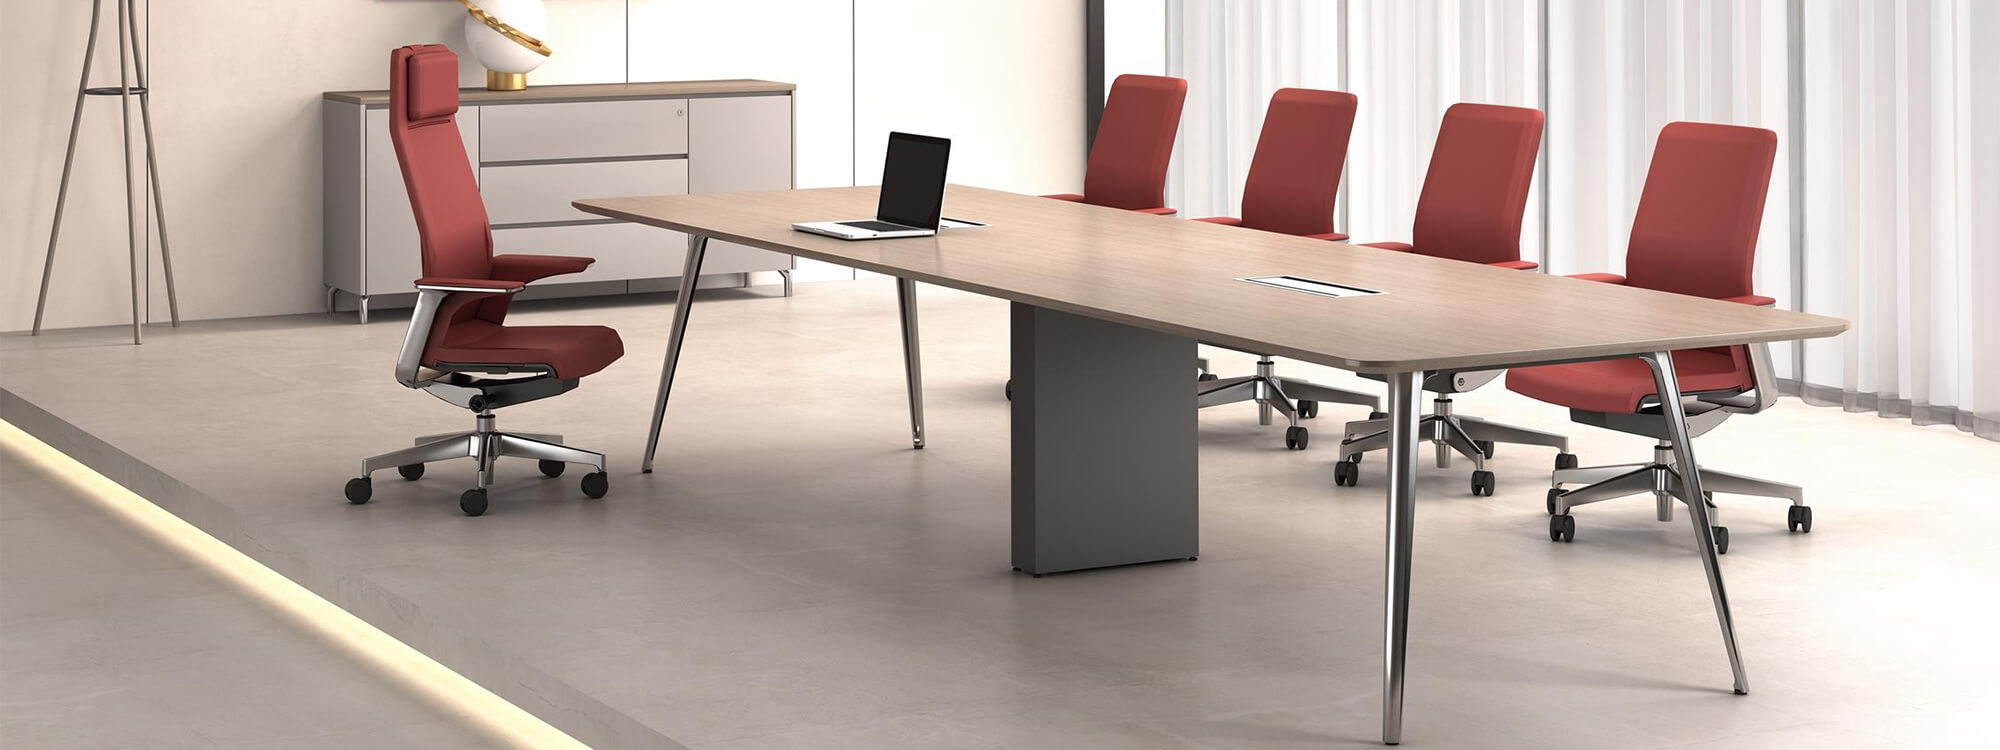 Excellence in design and engineering fuse to create a base that provides a clean, light, and modern solution to board rooms and collaborative teaming spaces.